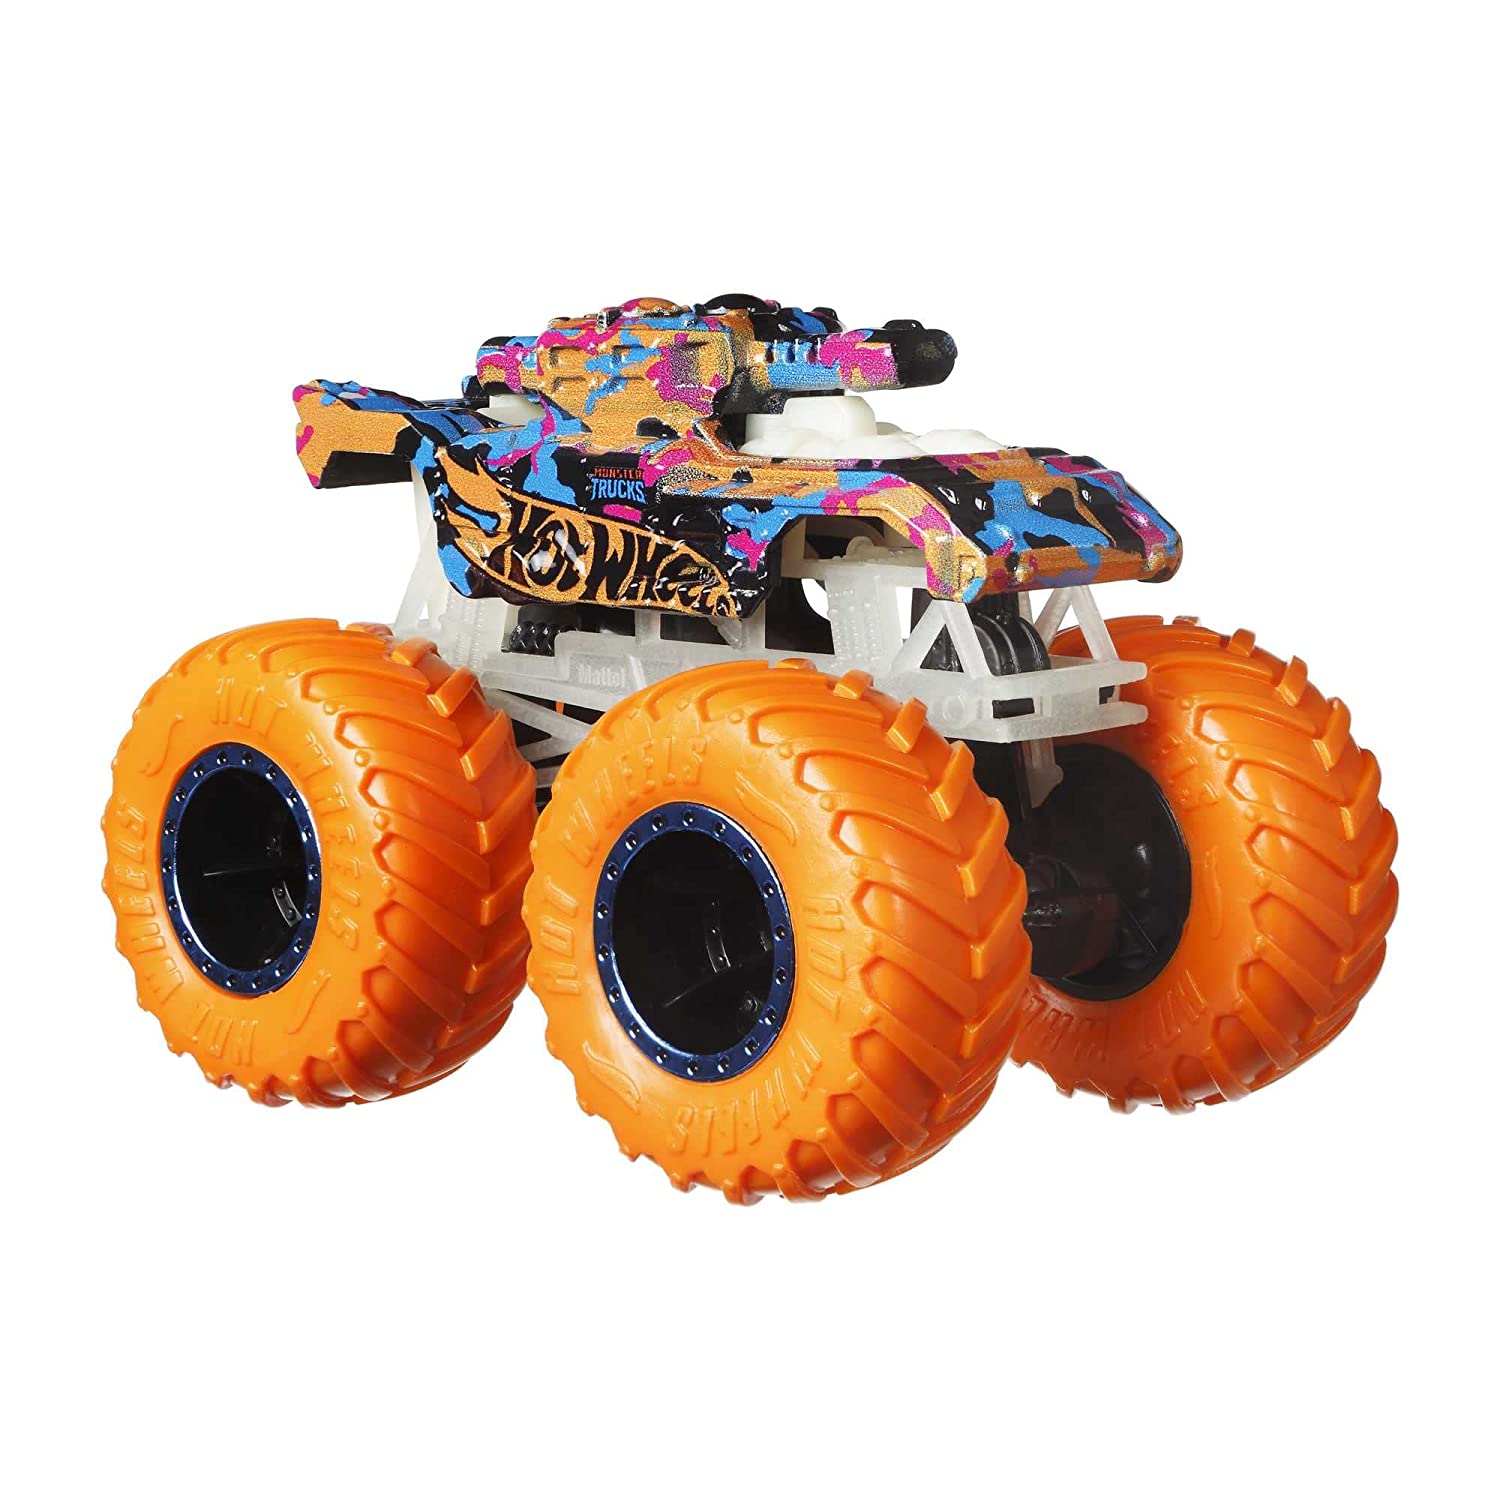 Hot Wheels Monster Trucks Glow In The Dark Multipack of 10 Collectible for Gift for Kids Ages 4+